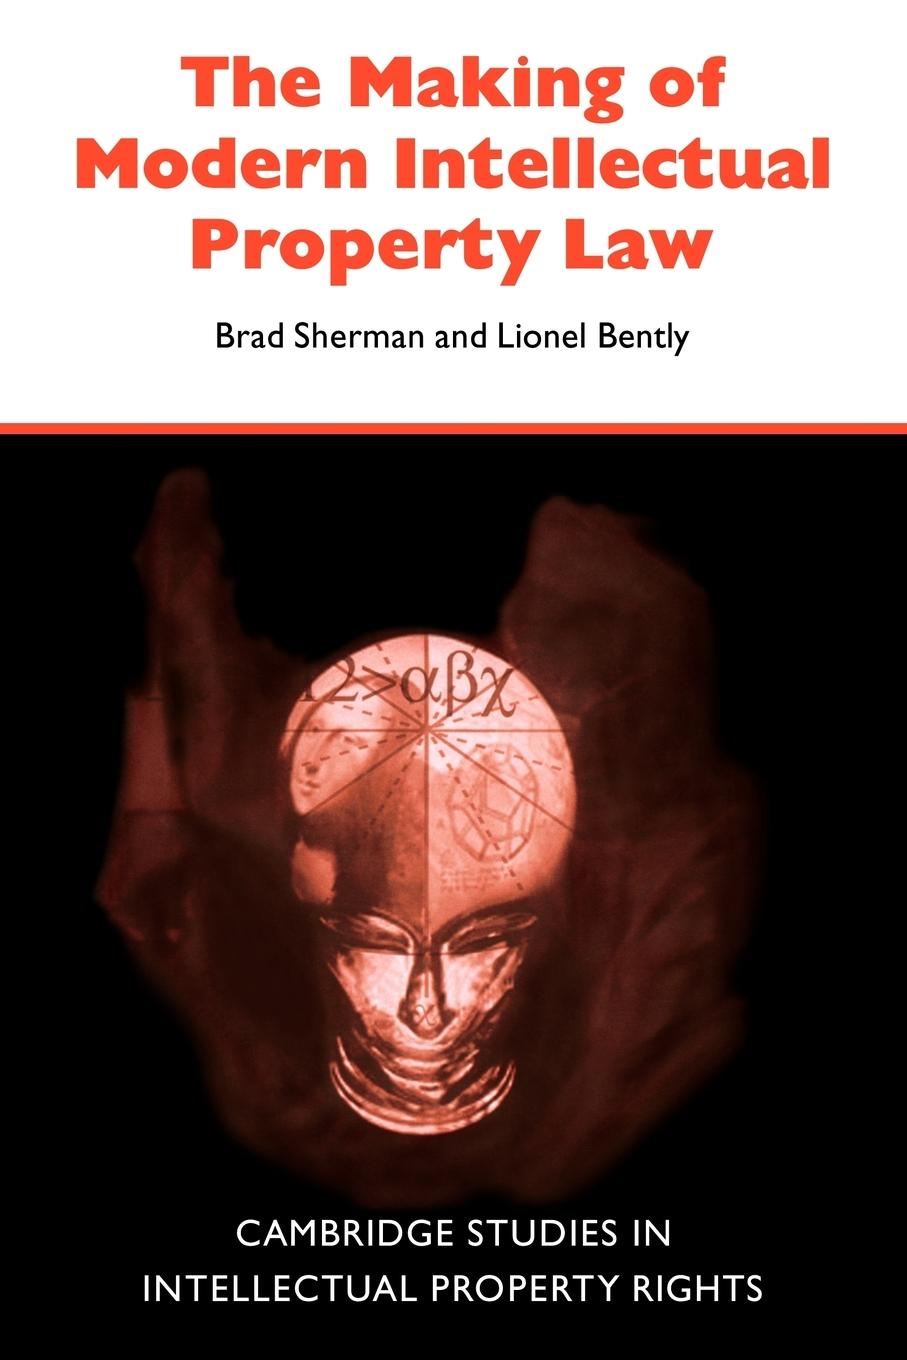 The Making of Modern Intellectual Property Law - Sherman, Brad Bently, Lionel